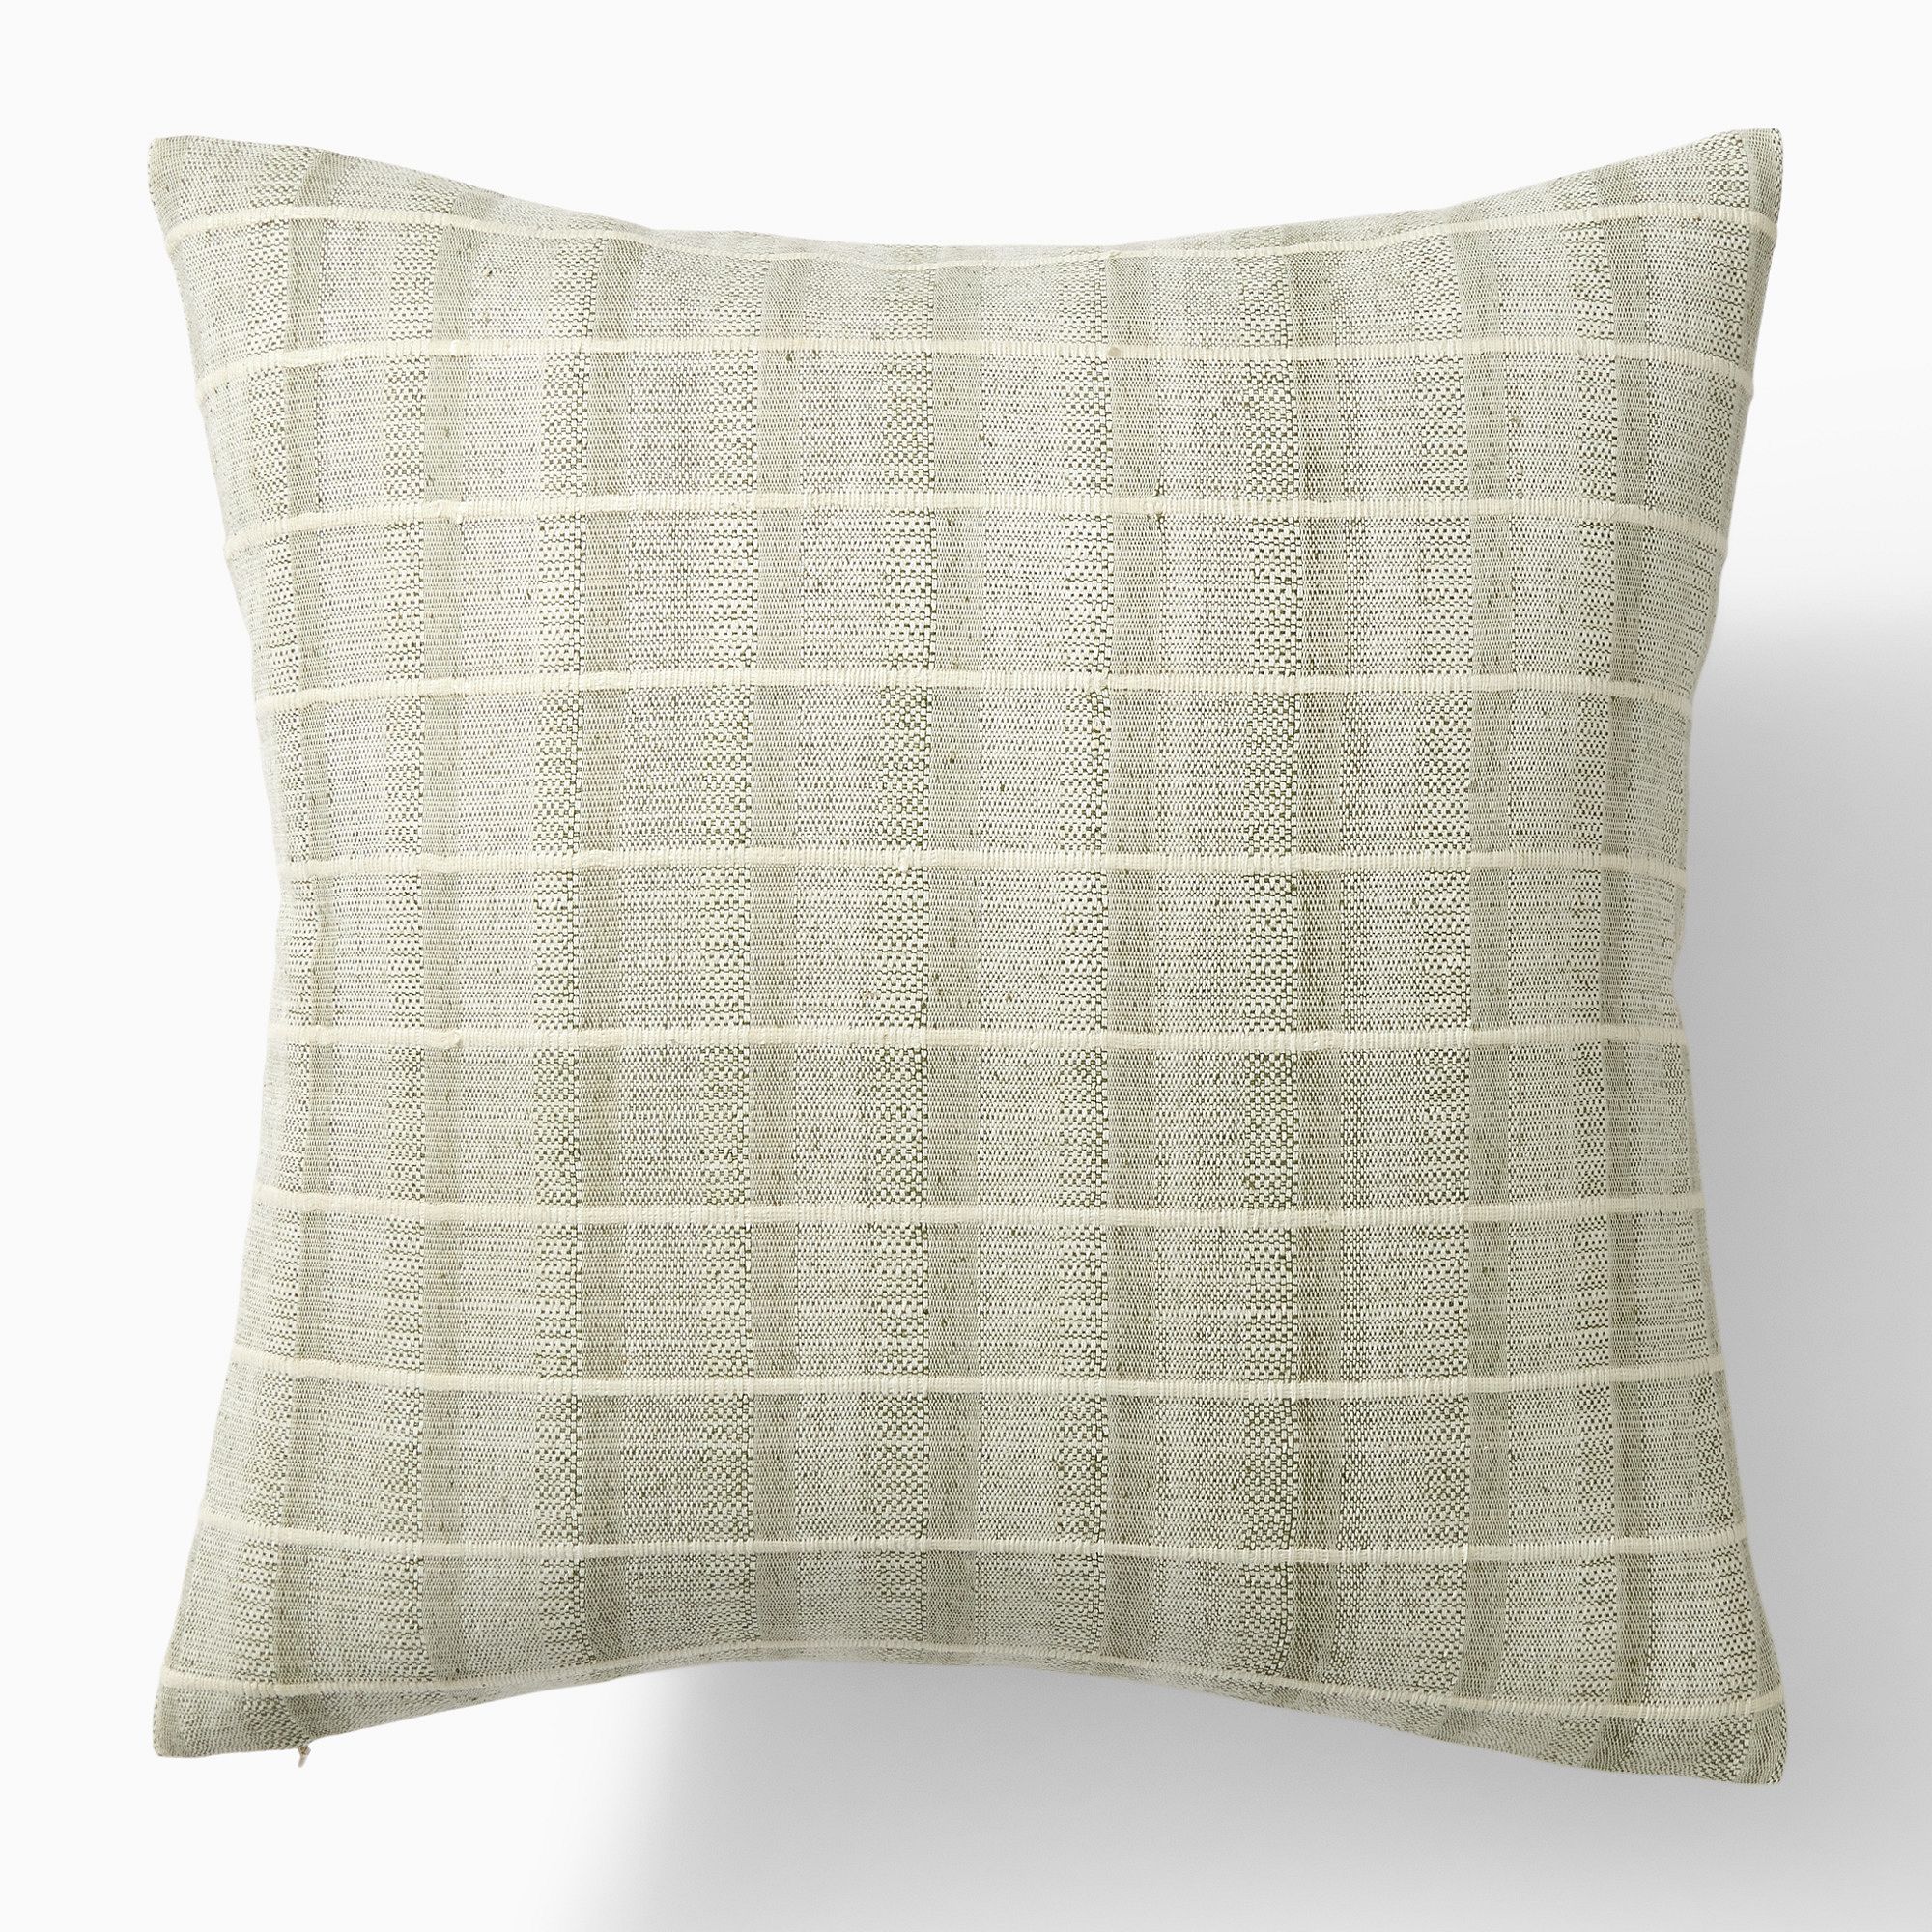 Corded Windowpane Pillow Cover | West Elm